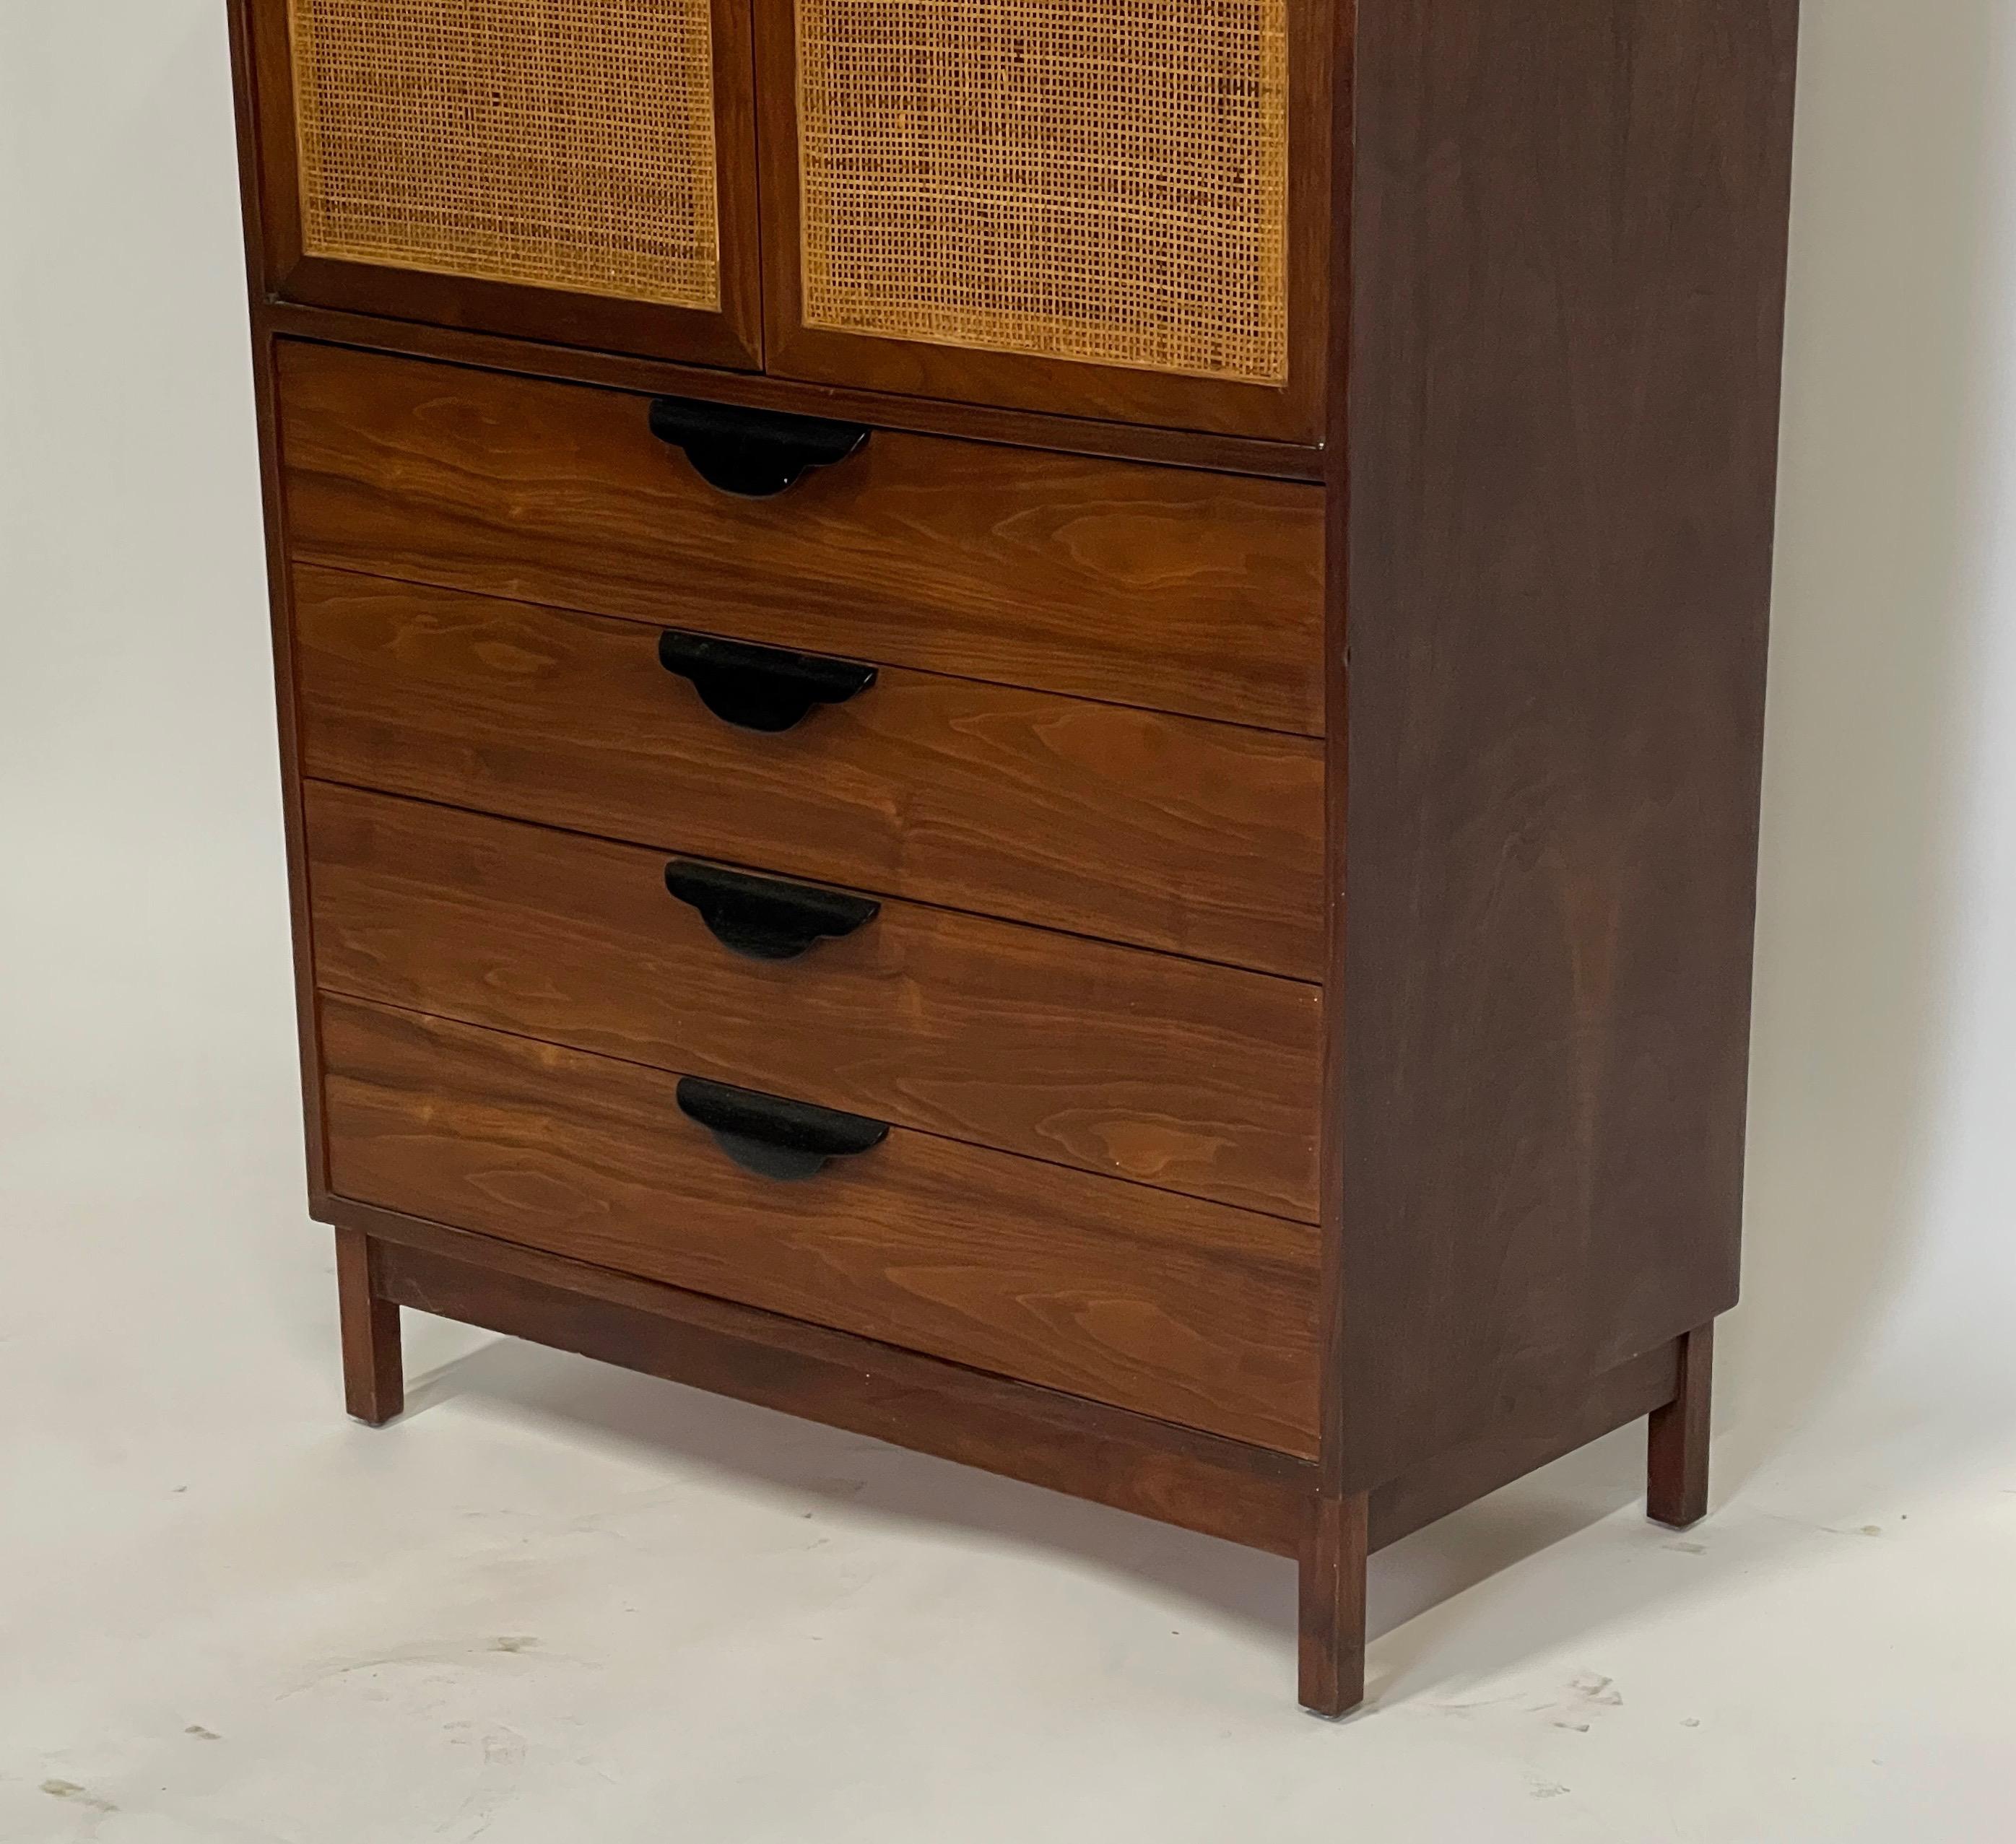 Stunning tall Jens Risom attributed highboy with ebonized oak pulls and woven cane doors.